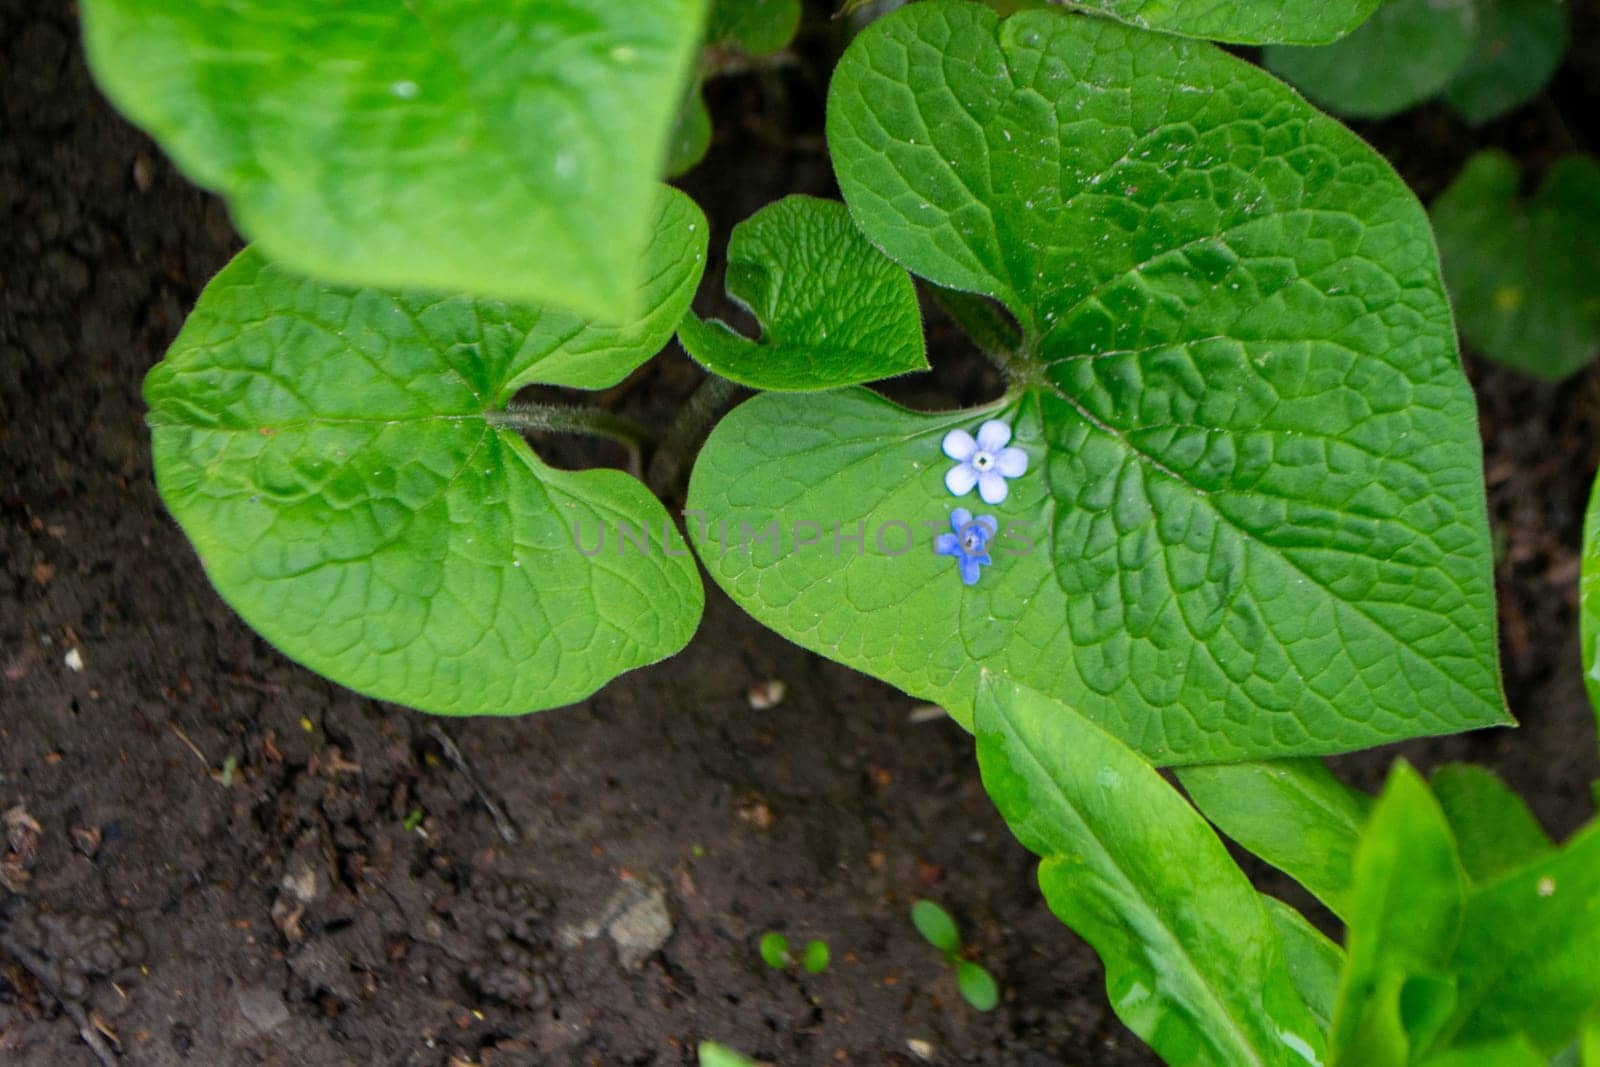 A close up of a plant with blue flowers, forget-me-not flower. High quality photo